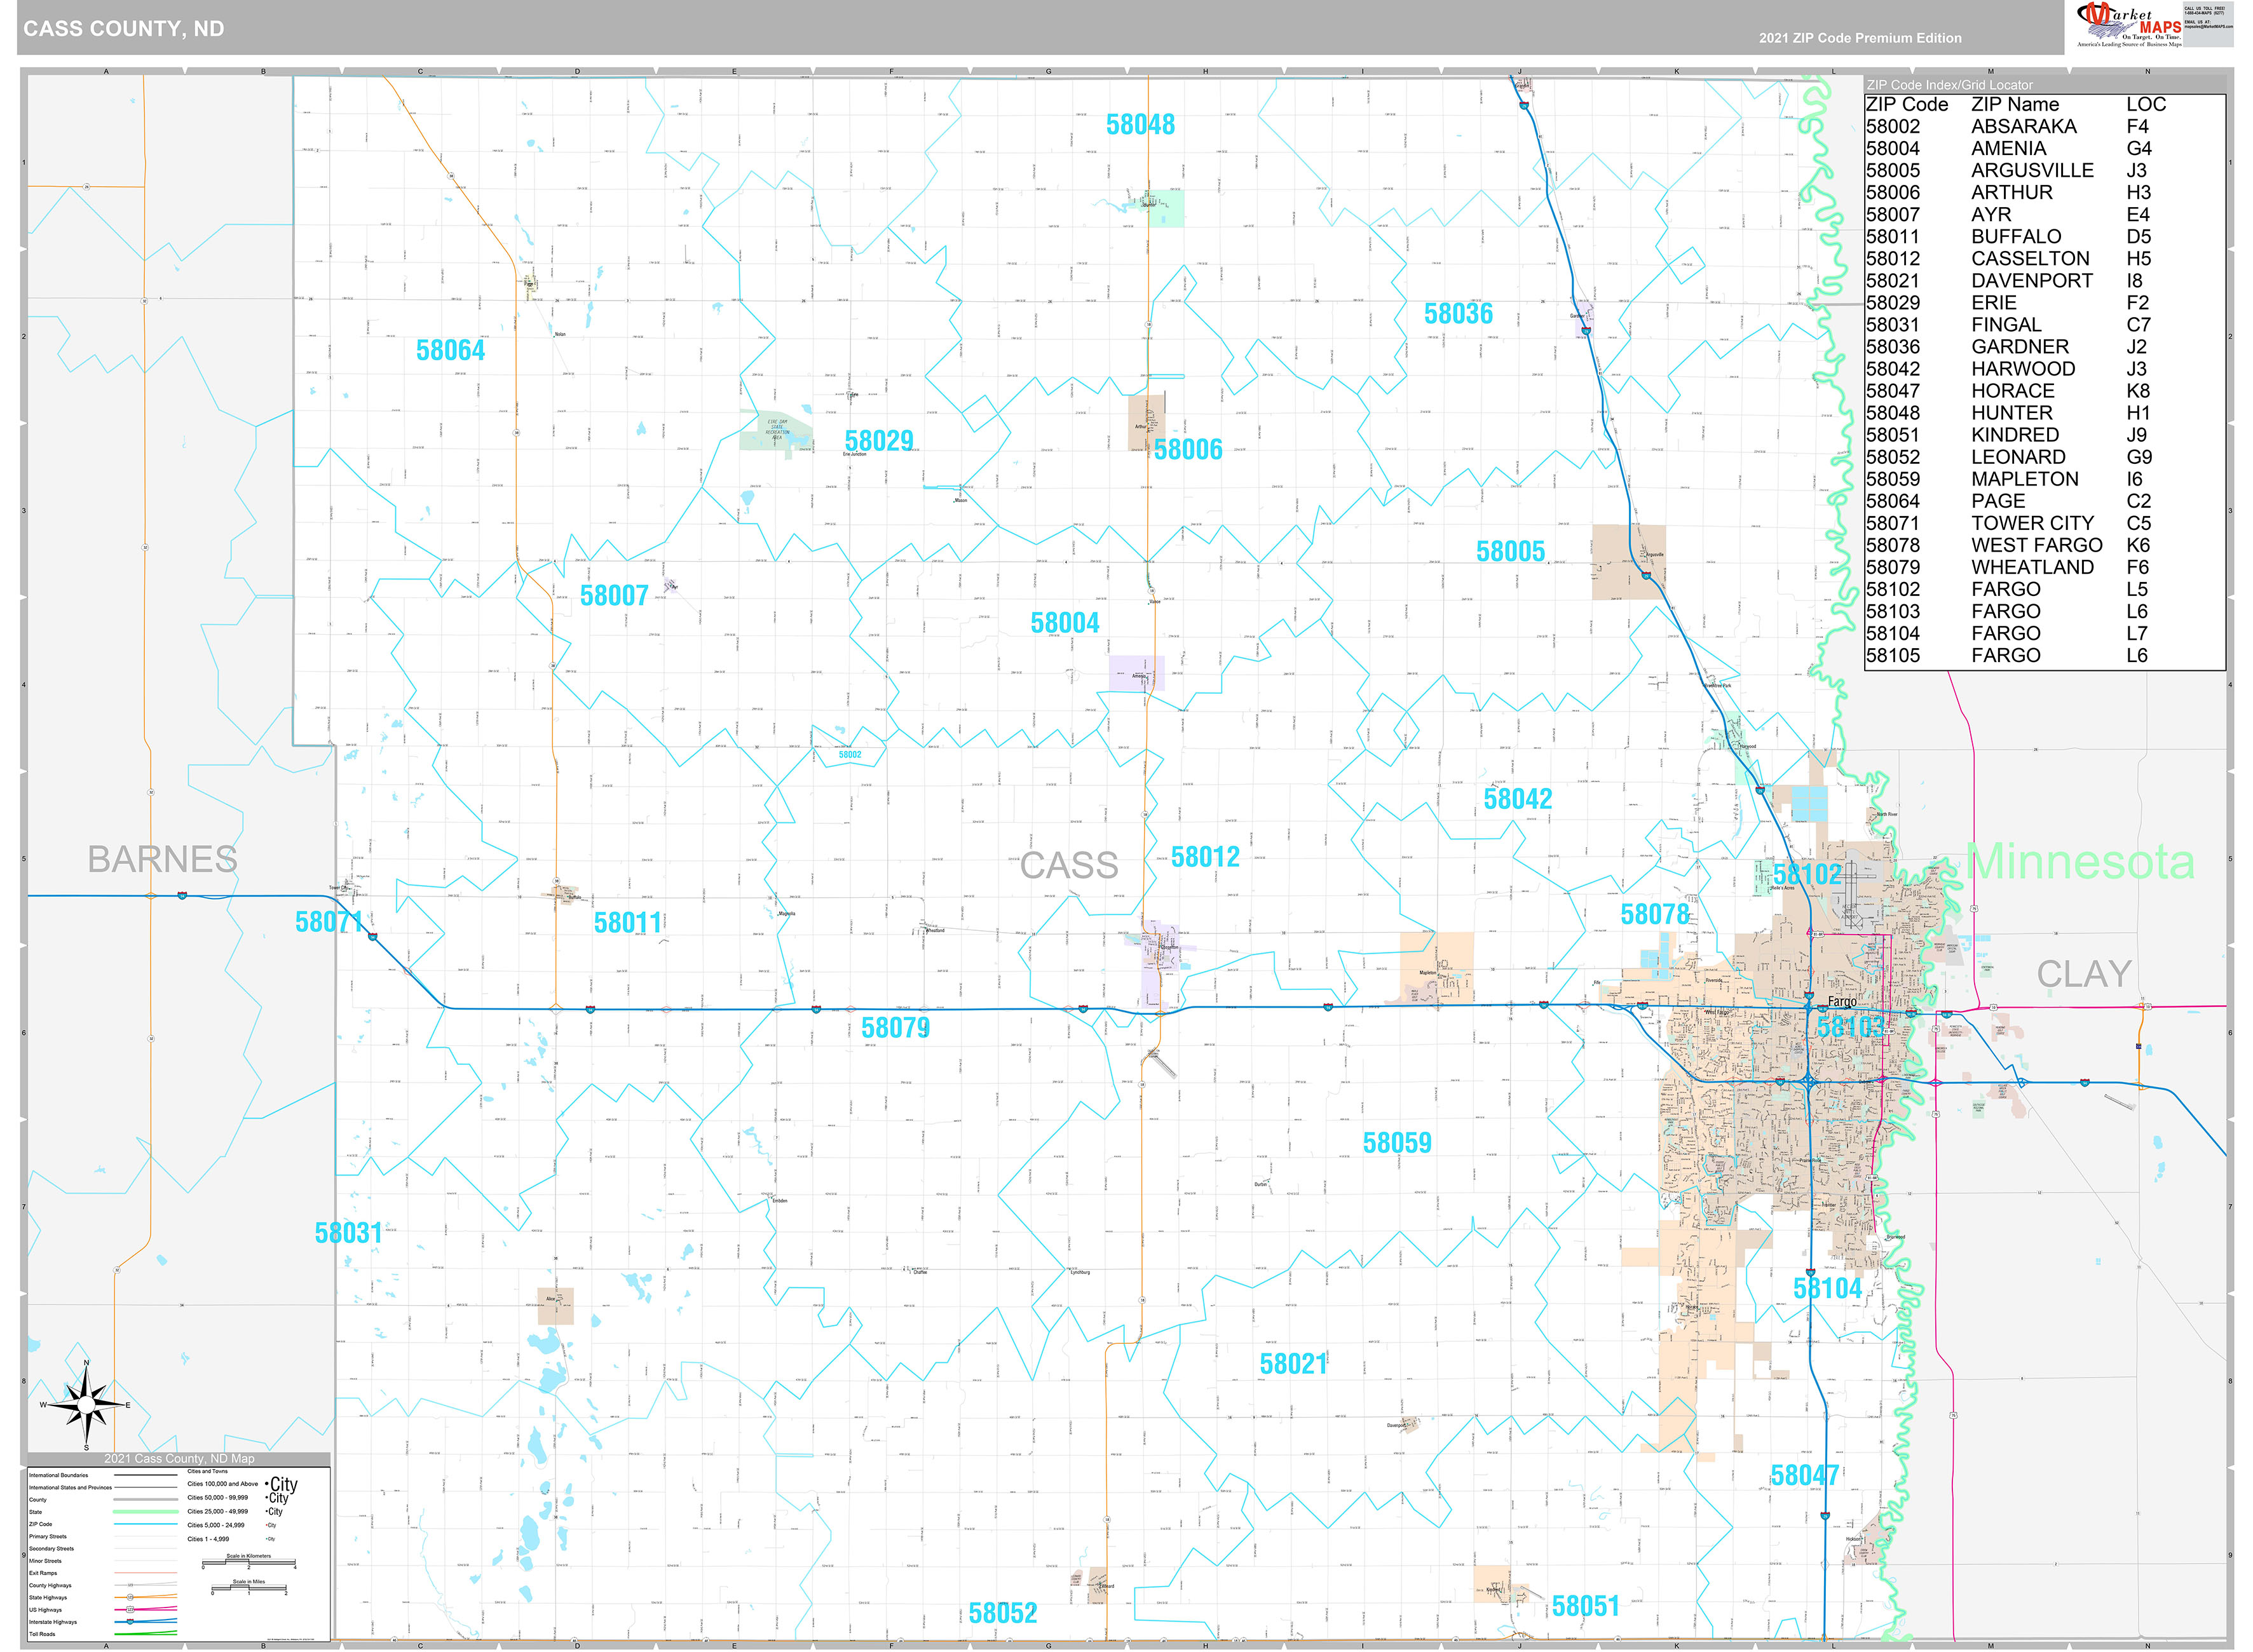 Cass County, ND Wall Map Premium Style by MarketMAPS